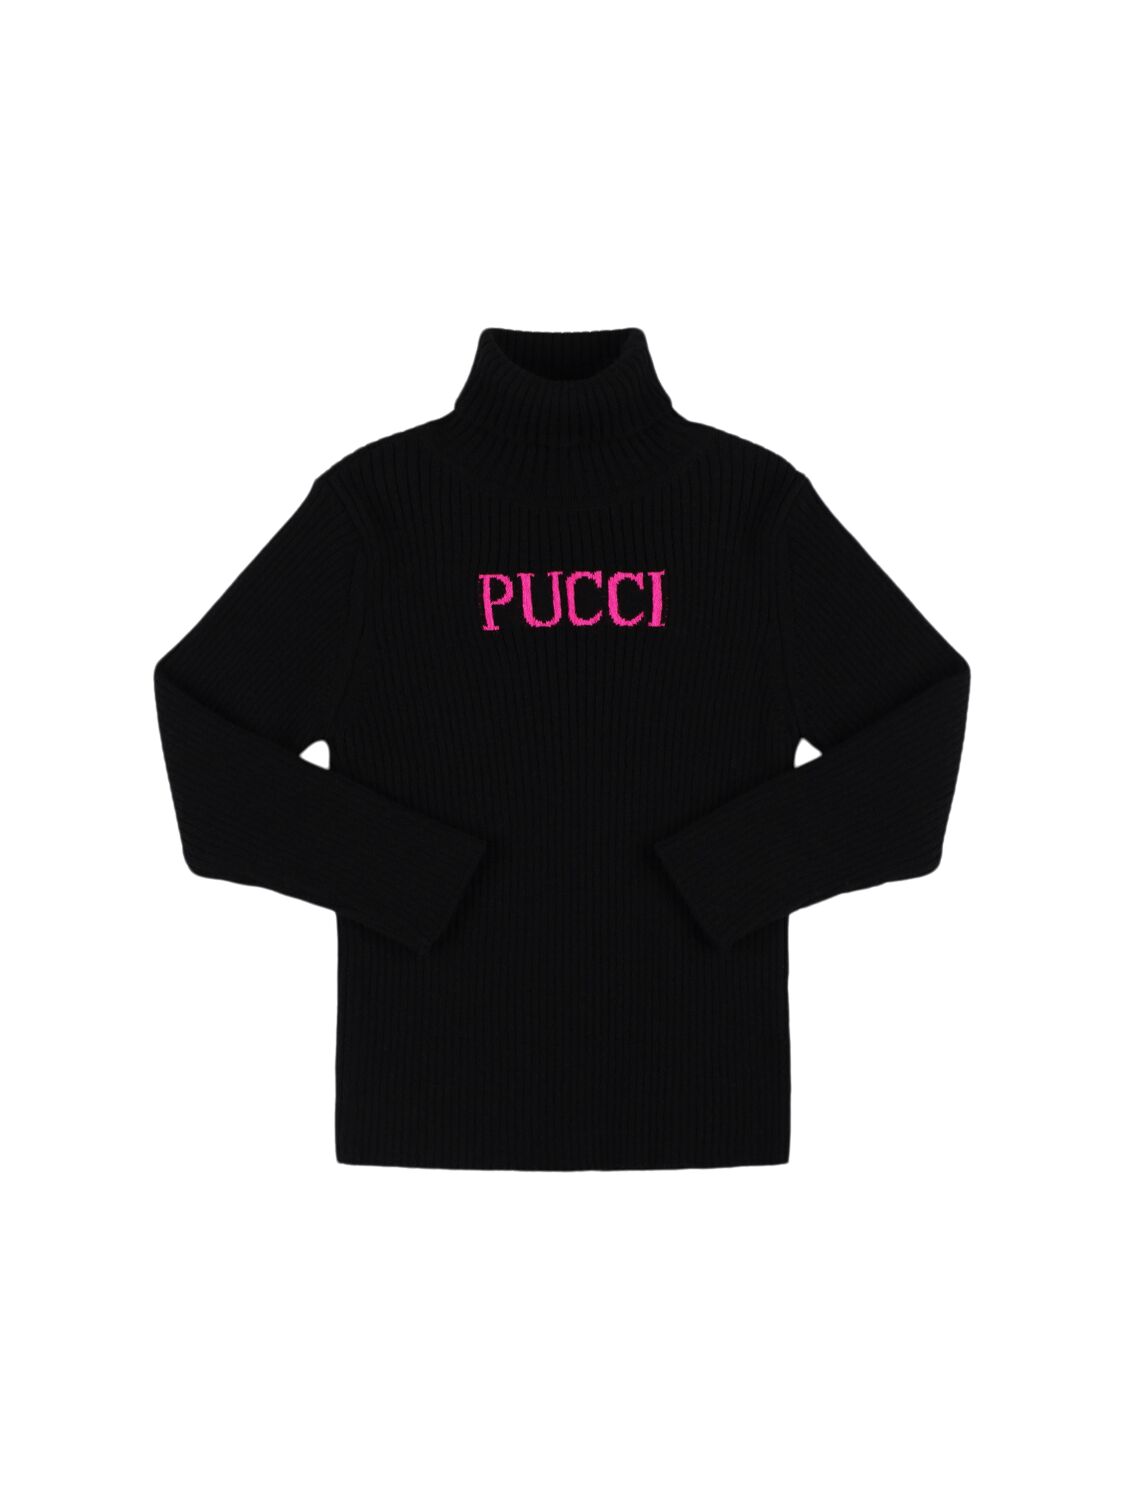 Pucci Wool & Cashmere Knit Turtleneck In Black